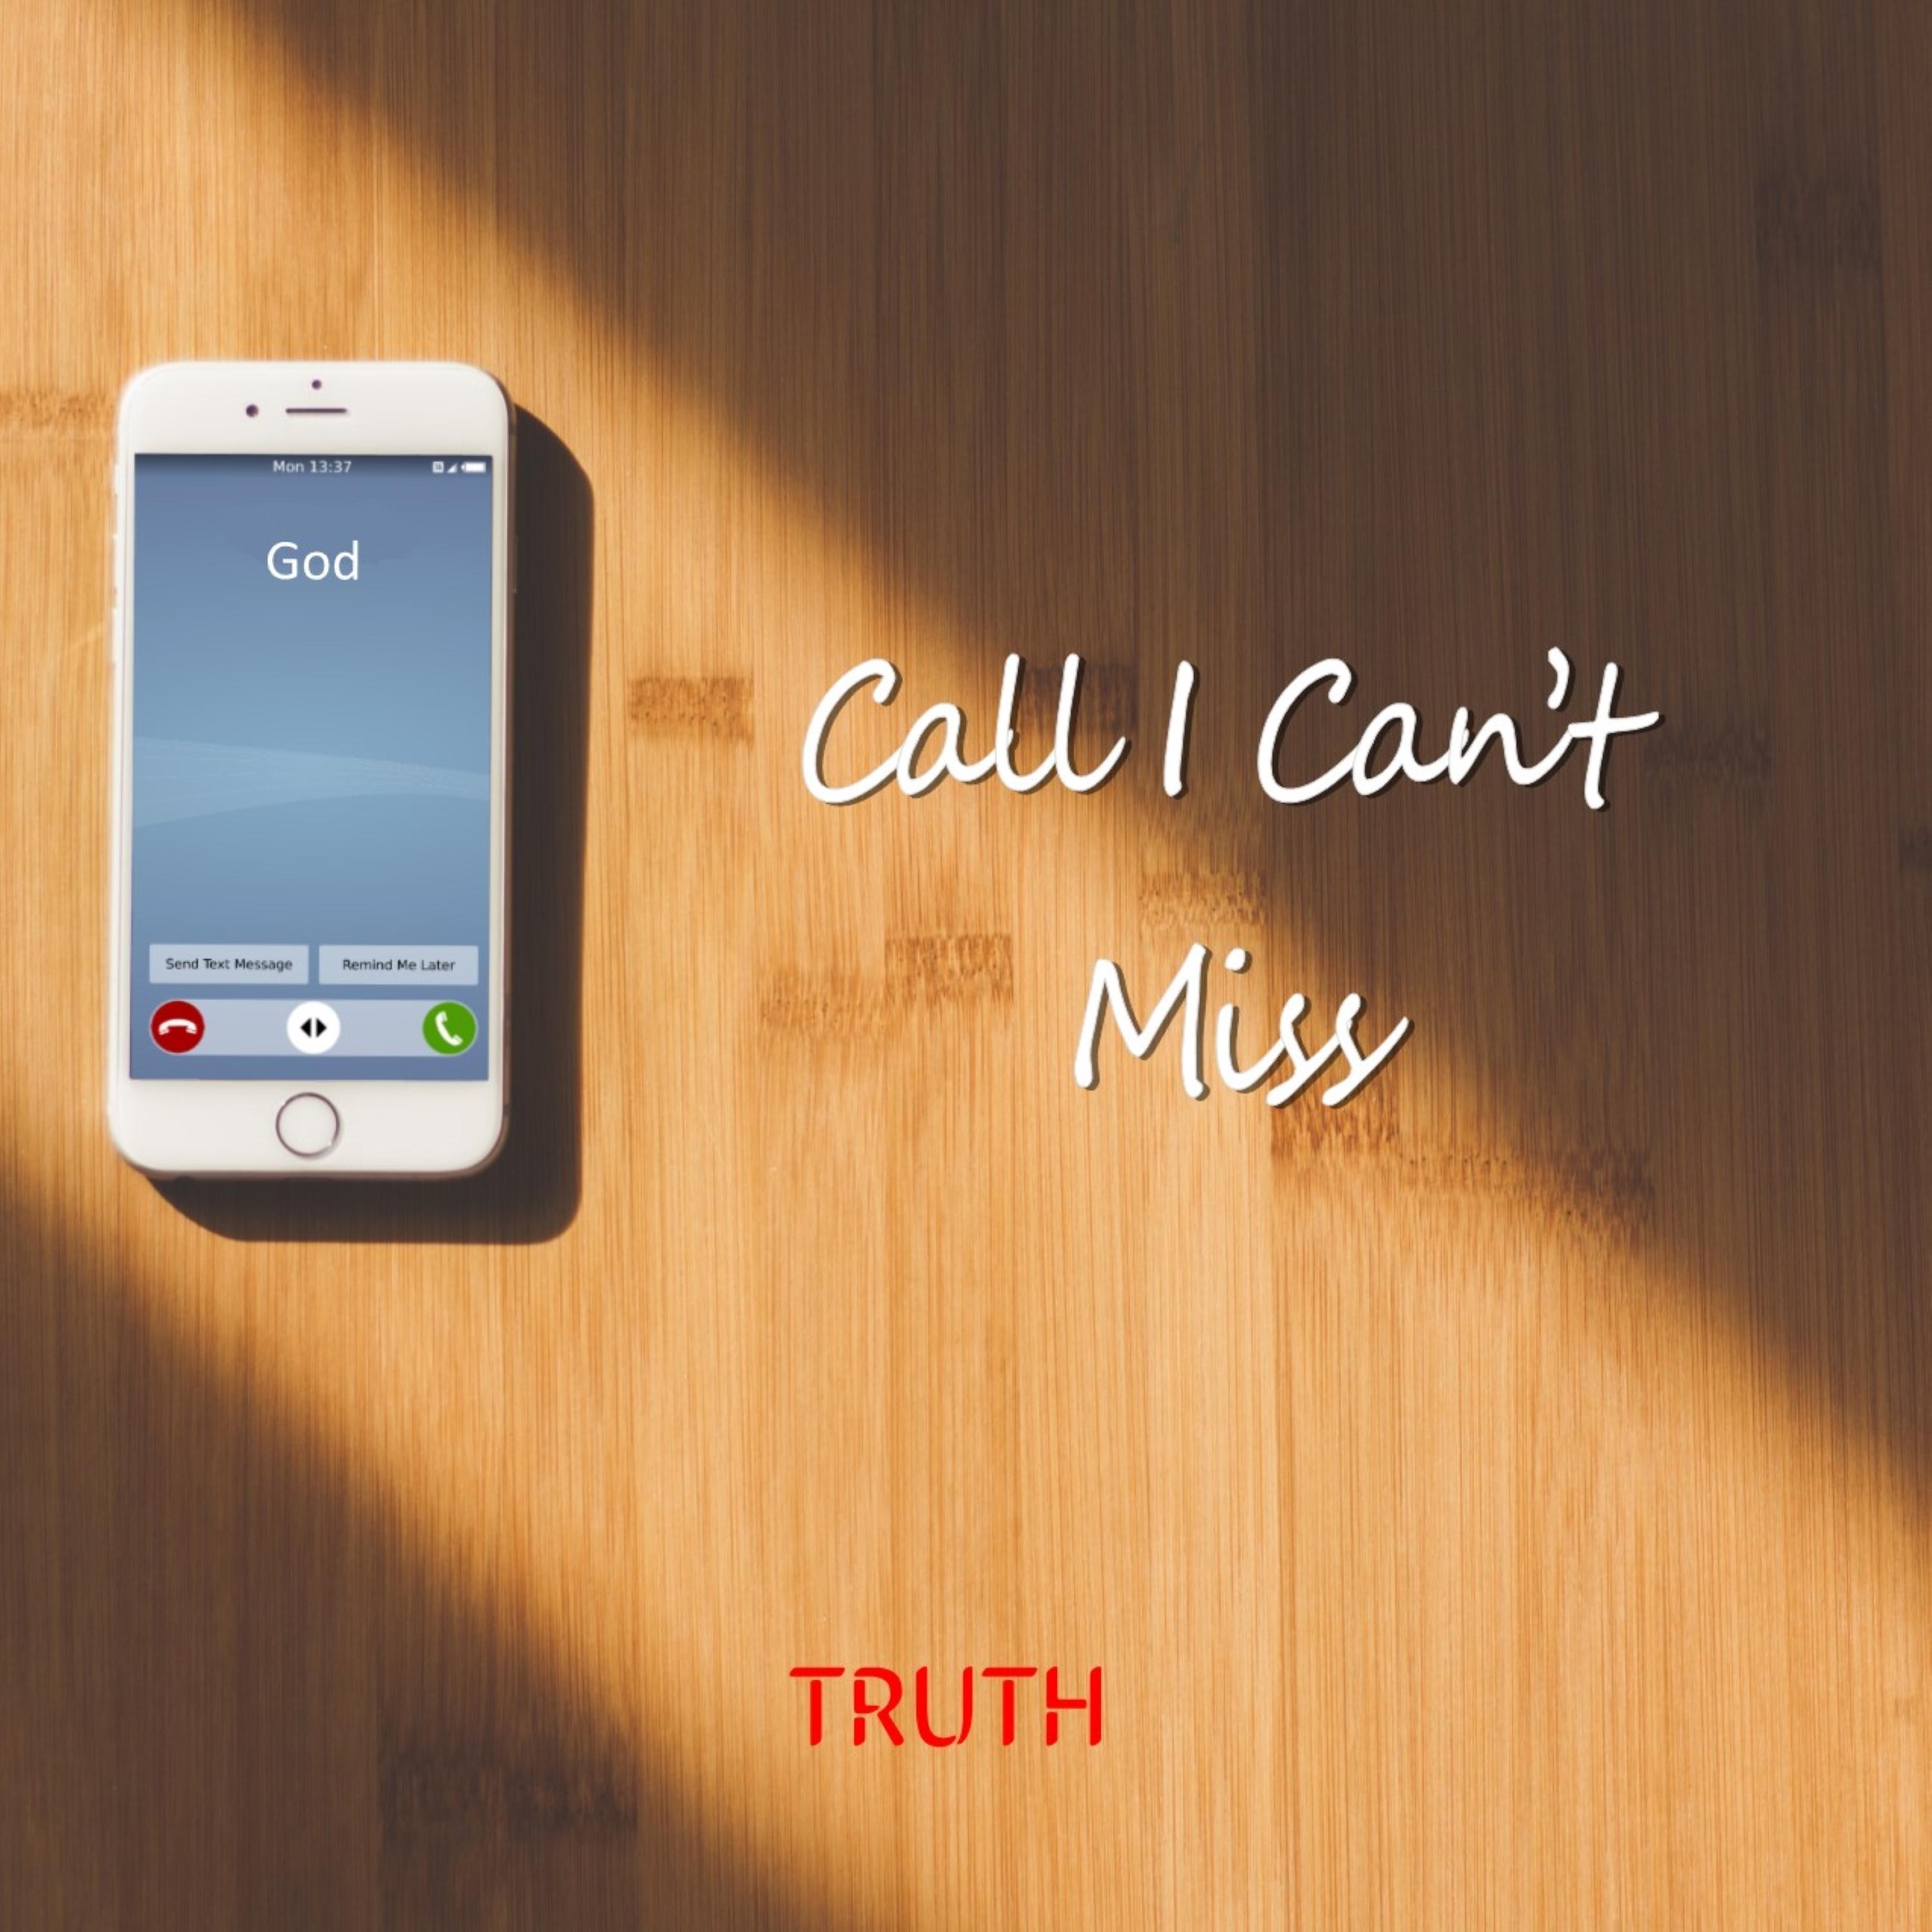 Call I Can't Miss